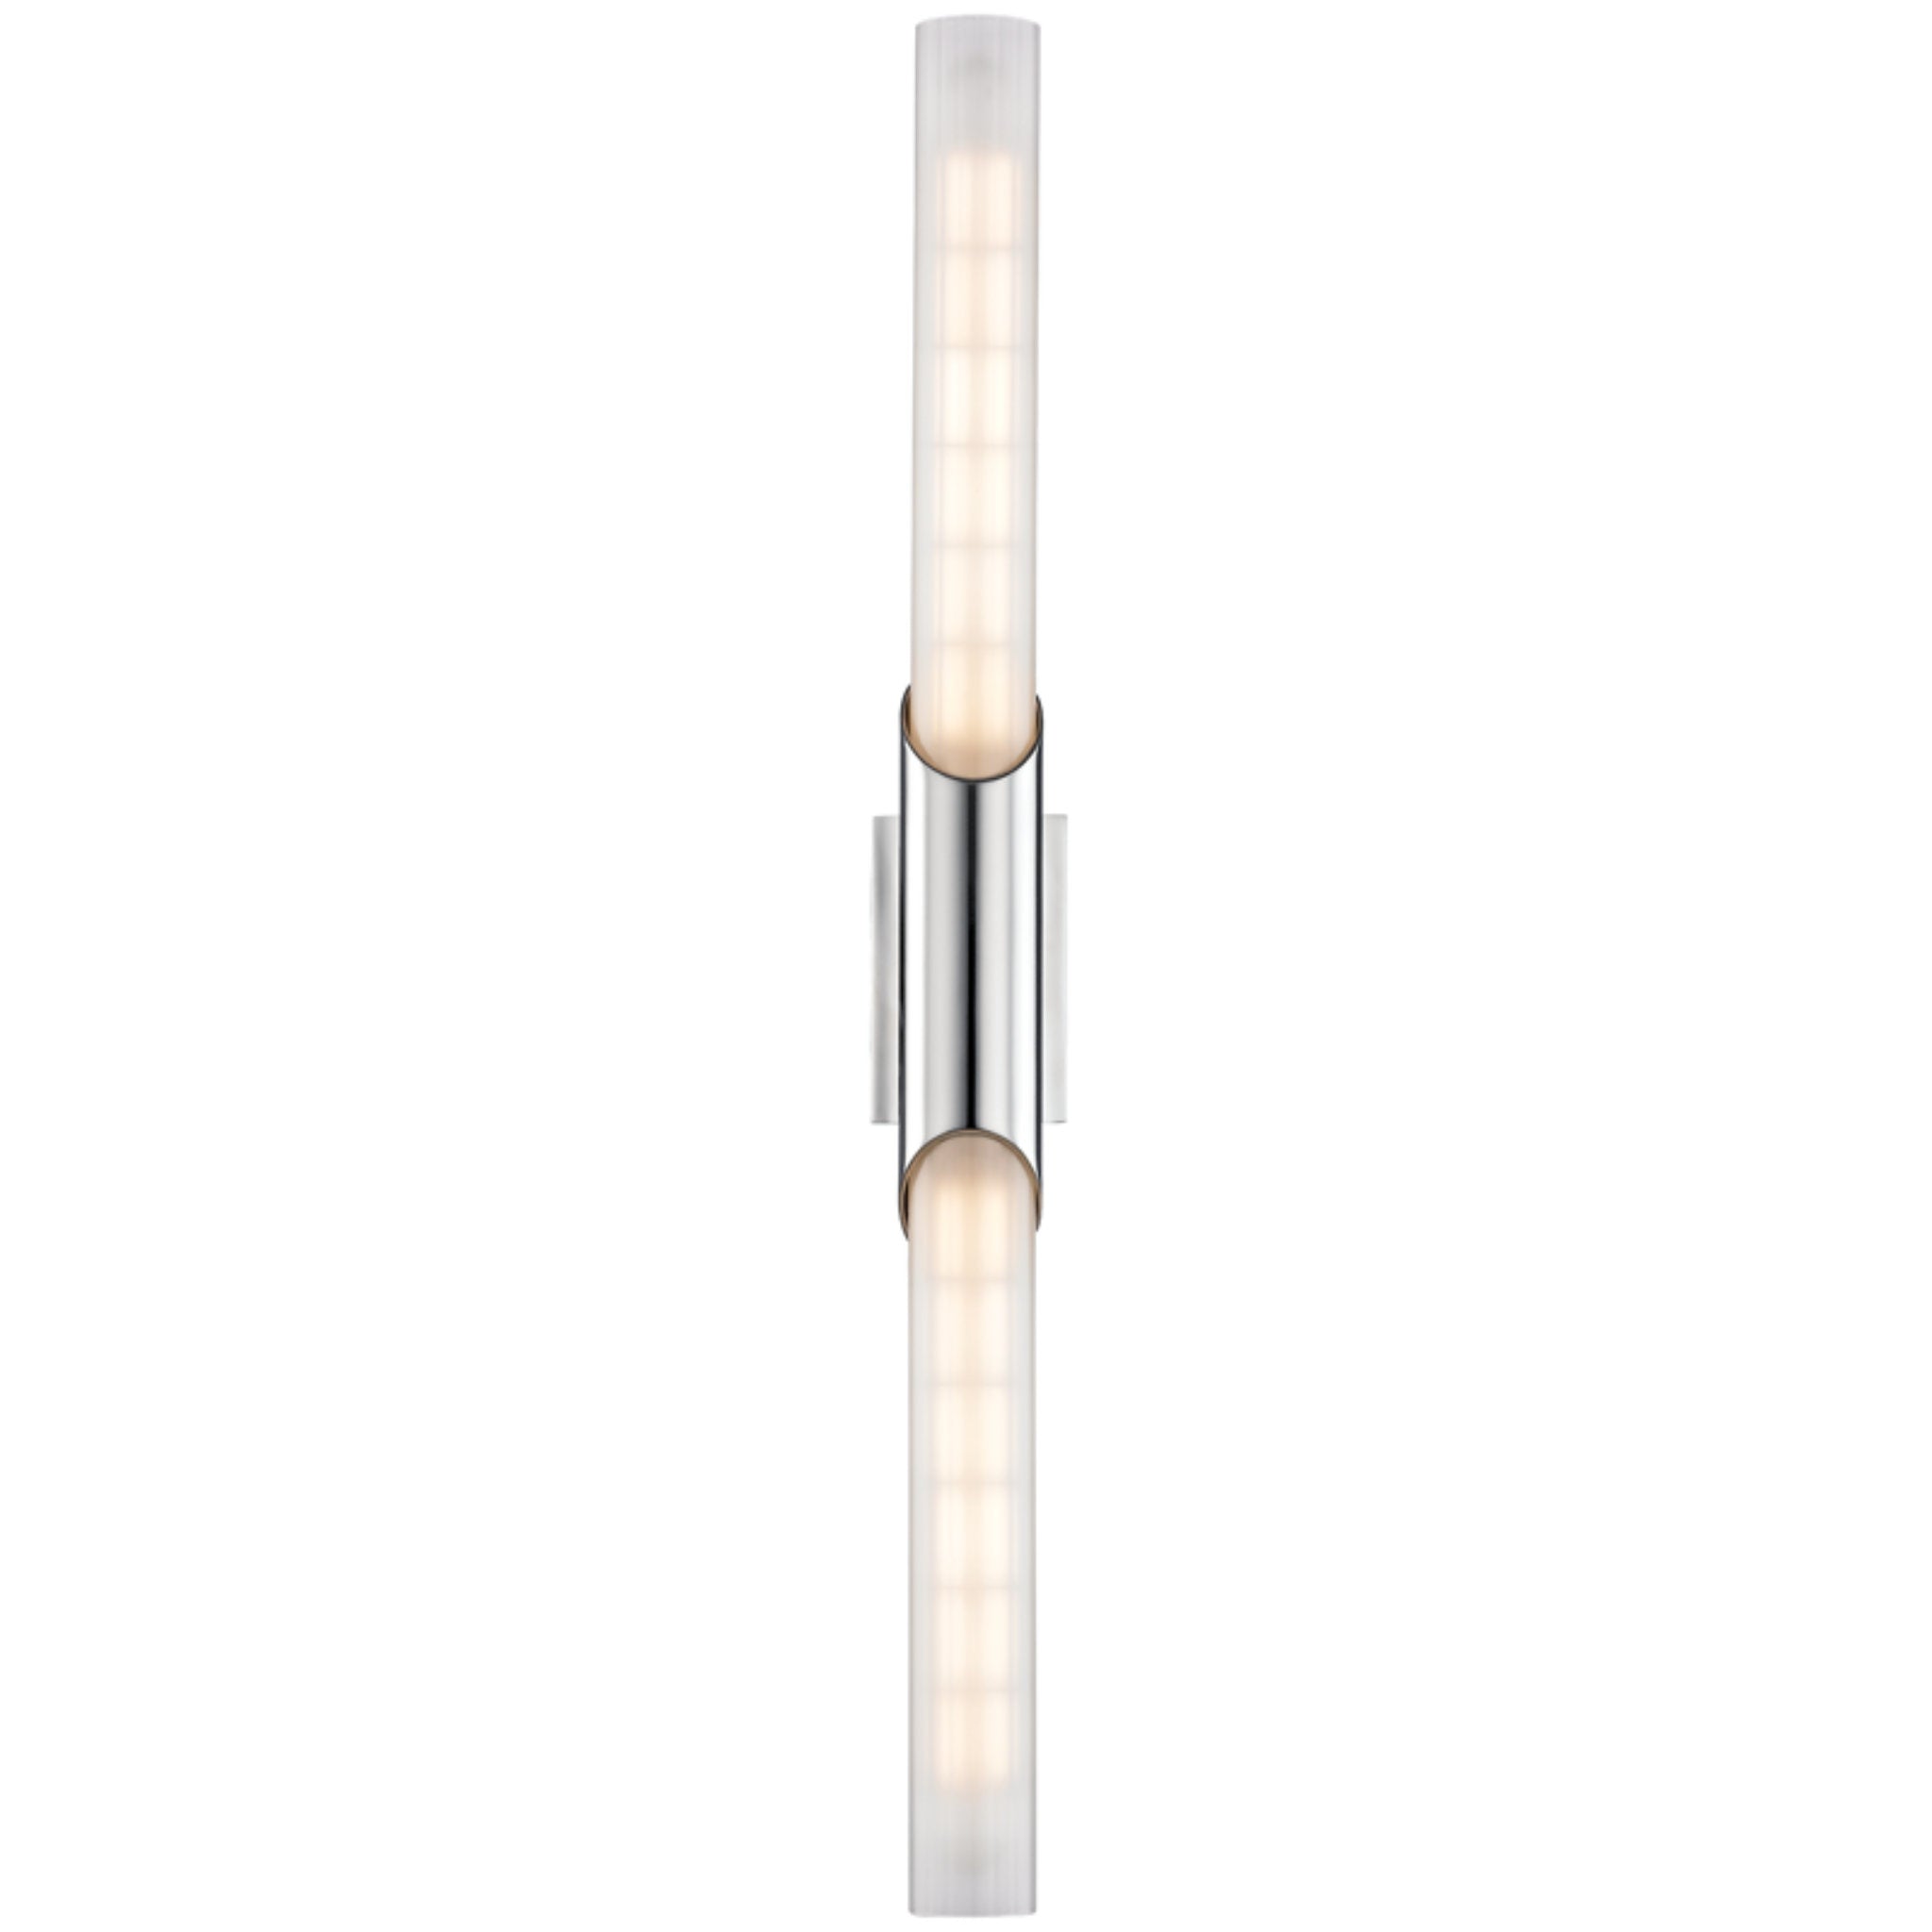 Pylon 2 Light Wall Sconce in Polished Chrome